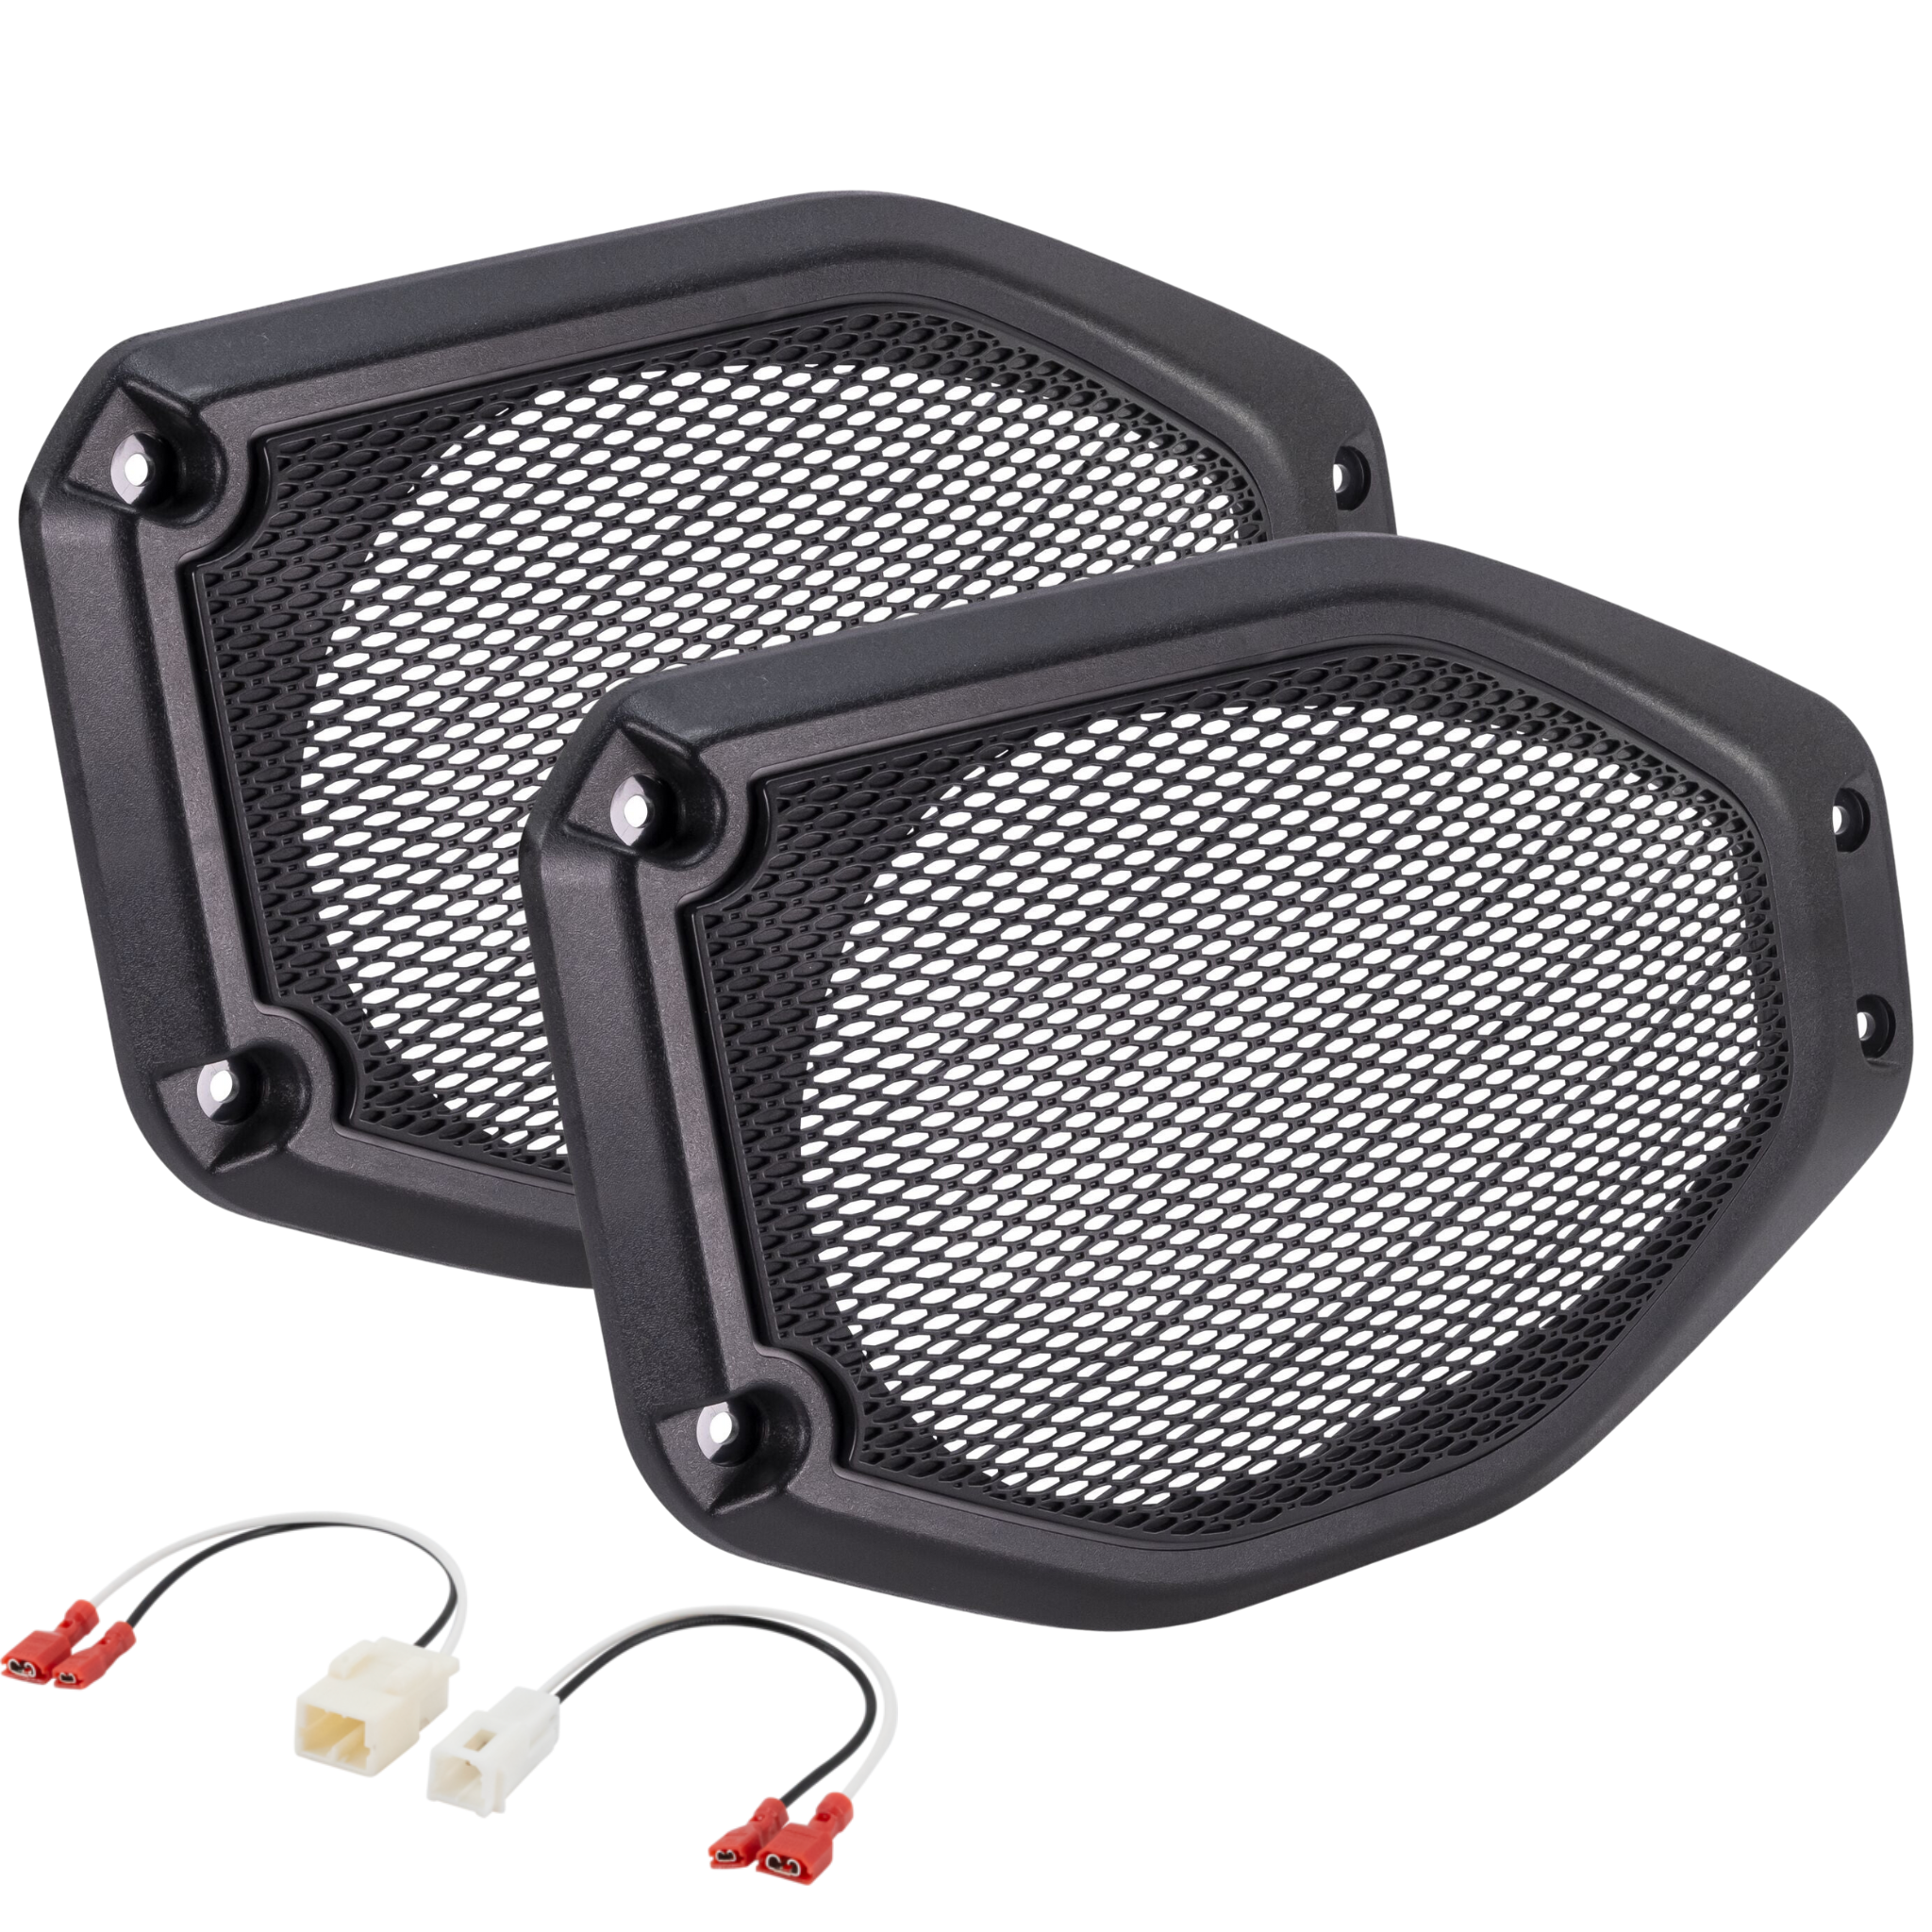 AudioControl PNW Series 6x9" 75 Watt (RMS) High-Fidelity Coaxial Speakers with Jeep Wrangler JL/Gladiator Sound Bar Mounting Kit (Pair)